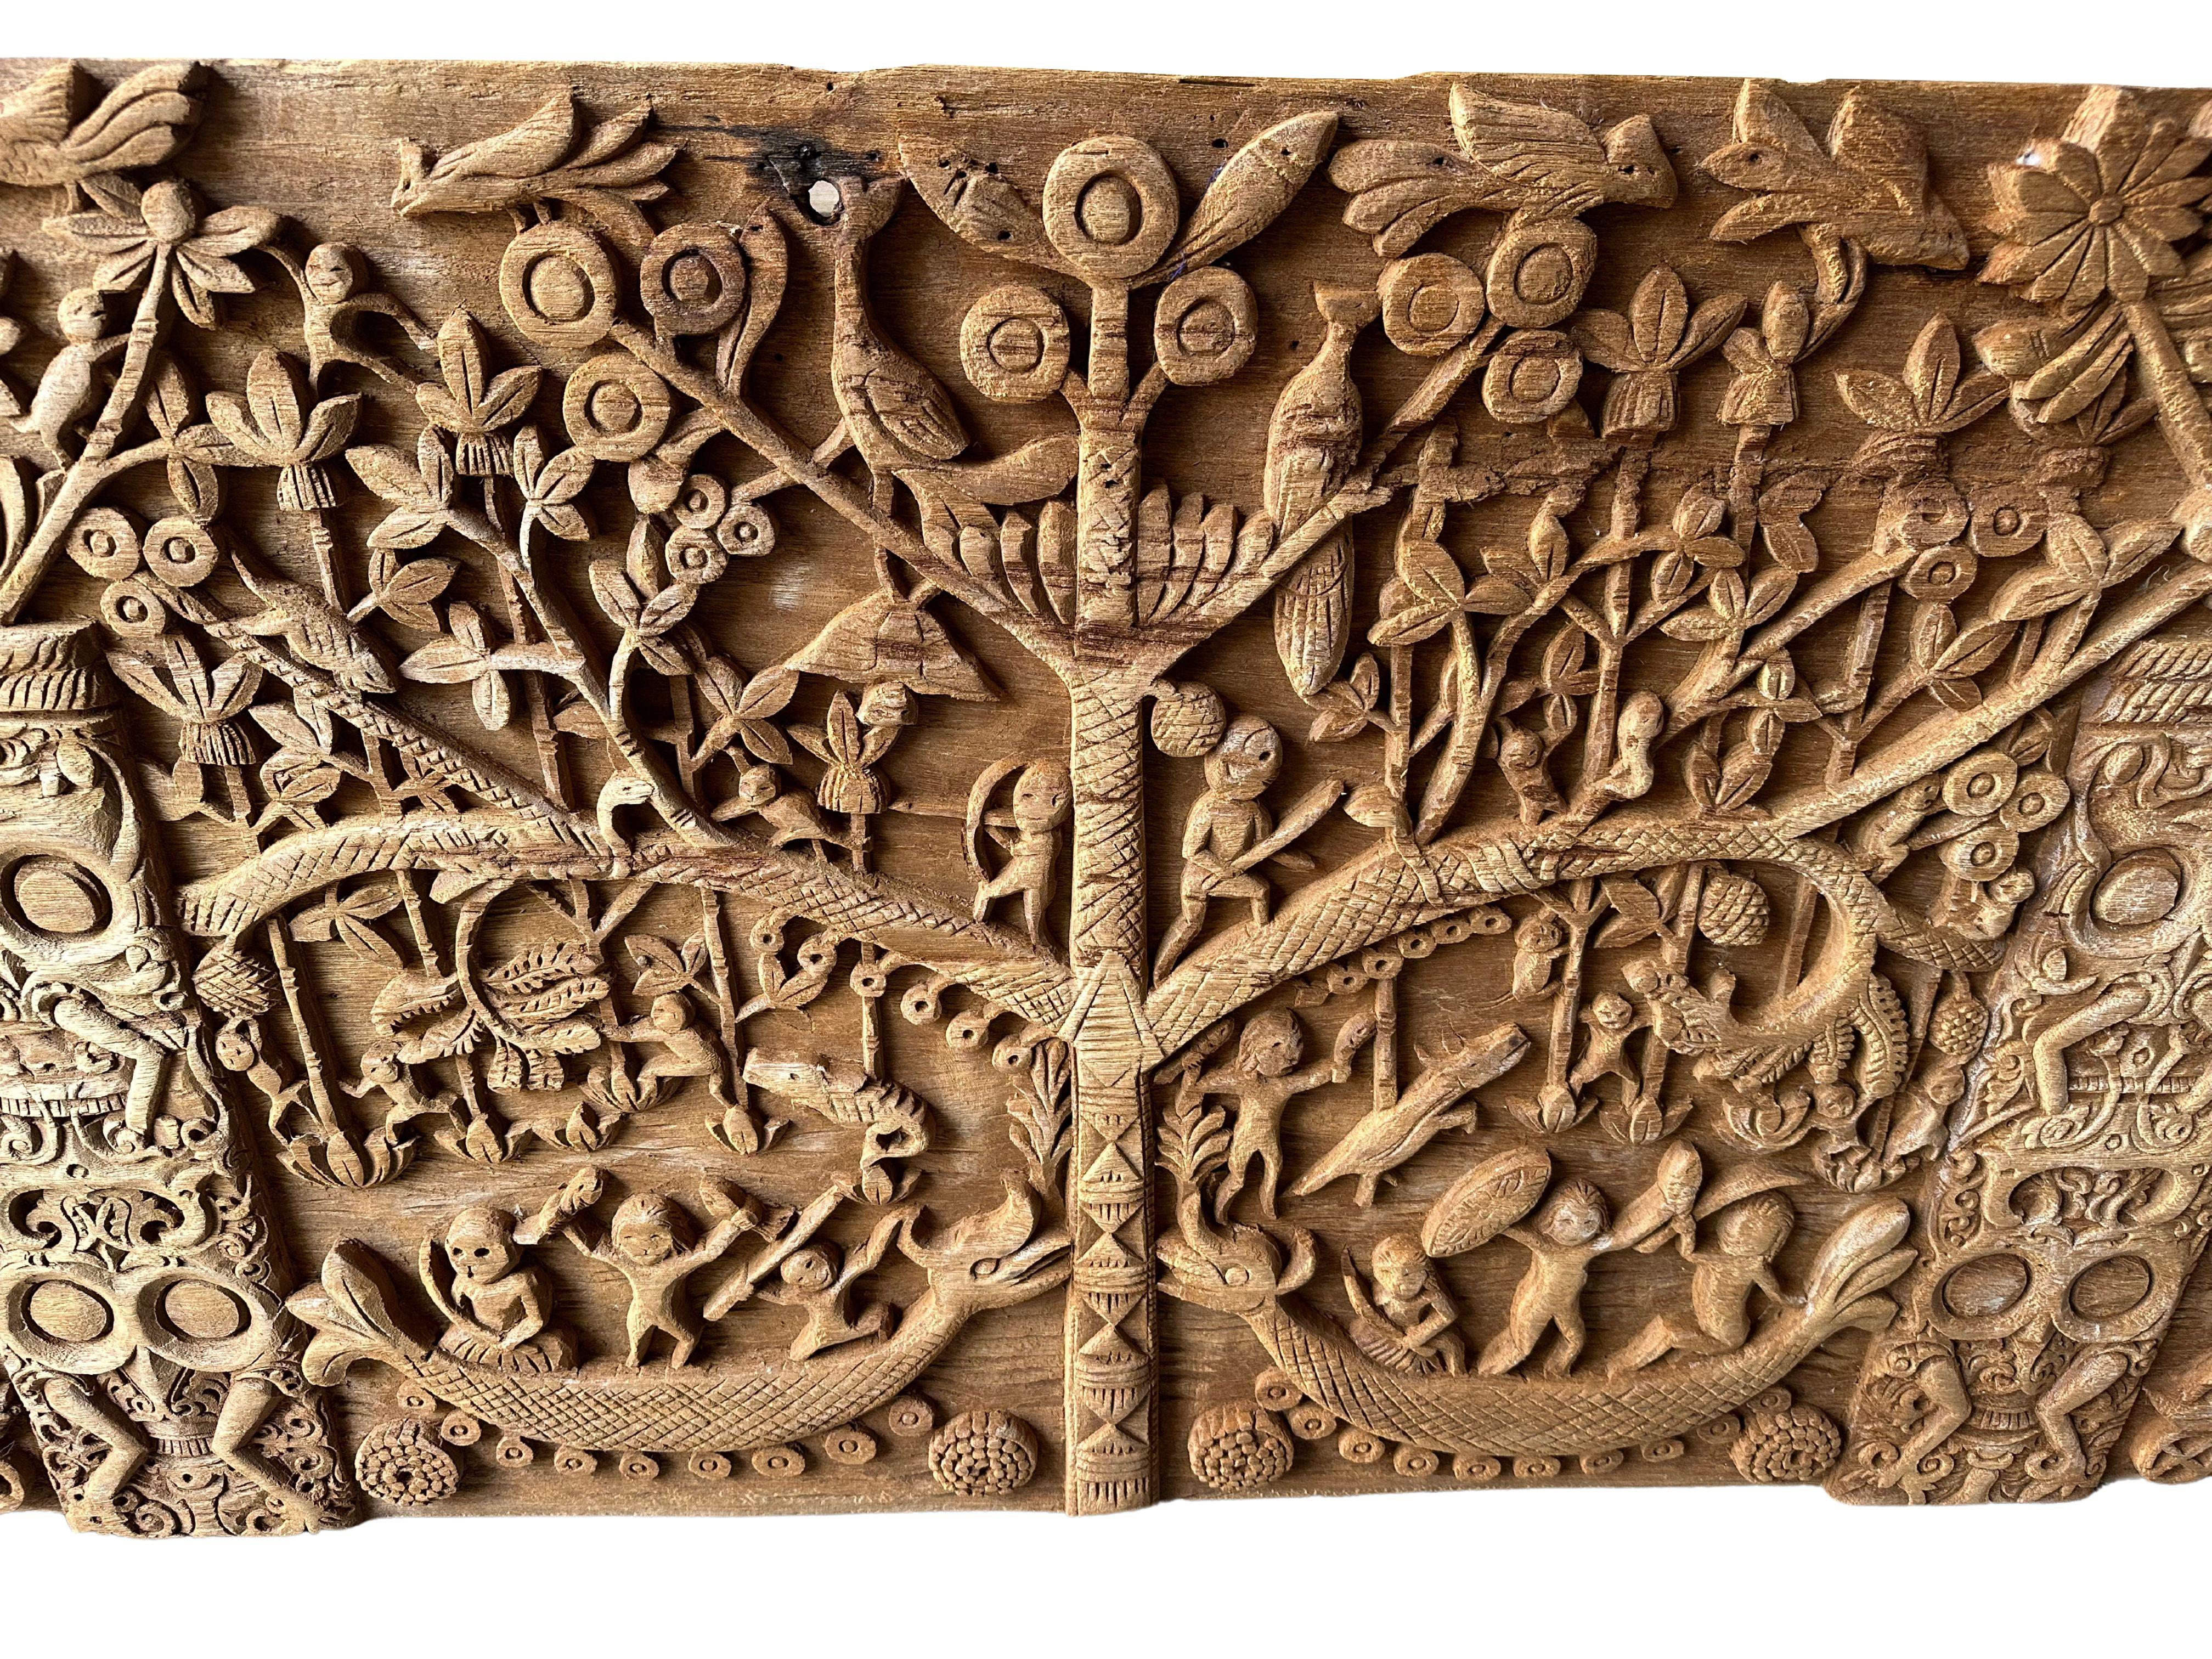 This unique teak carved panel depicts Dayak Tribal mythology. The Dayak people are some hundreds of various native groups found in the interior rainforests of Borneo. This carving depicts the tree of life, which the Dayak people believe exists on